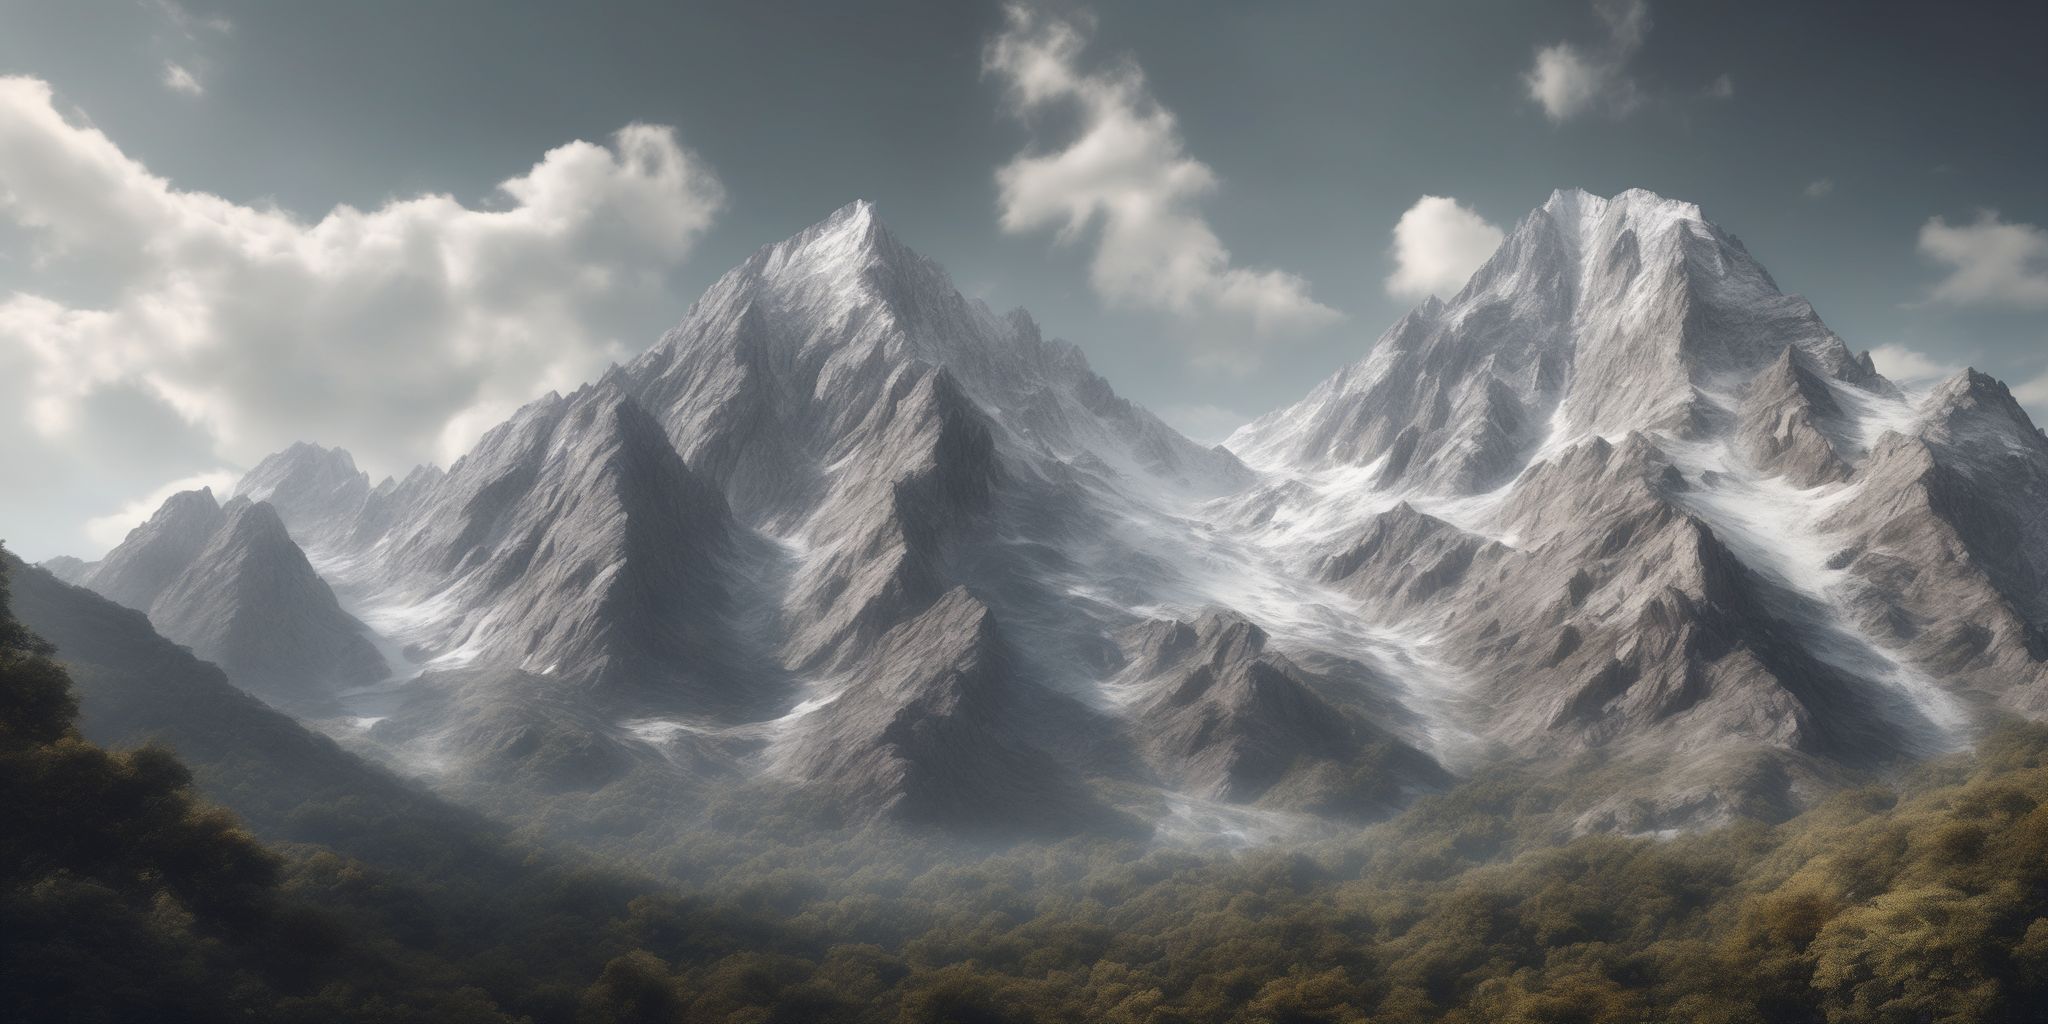 Mountain  in realistic, photographic style